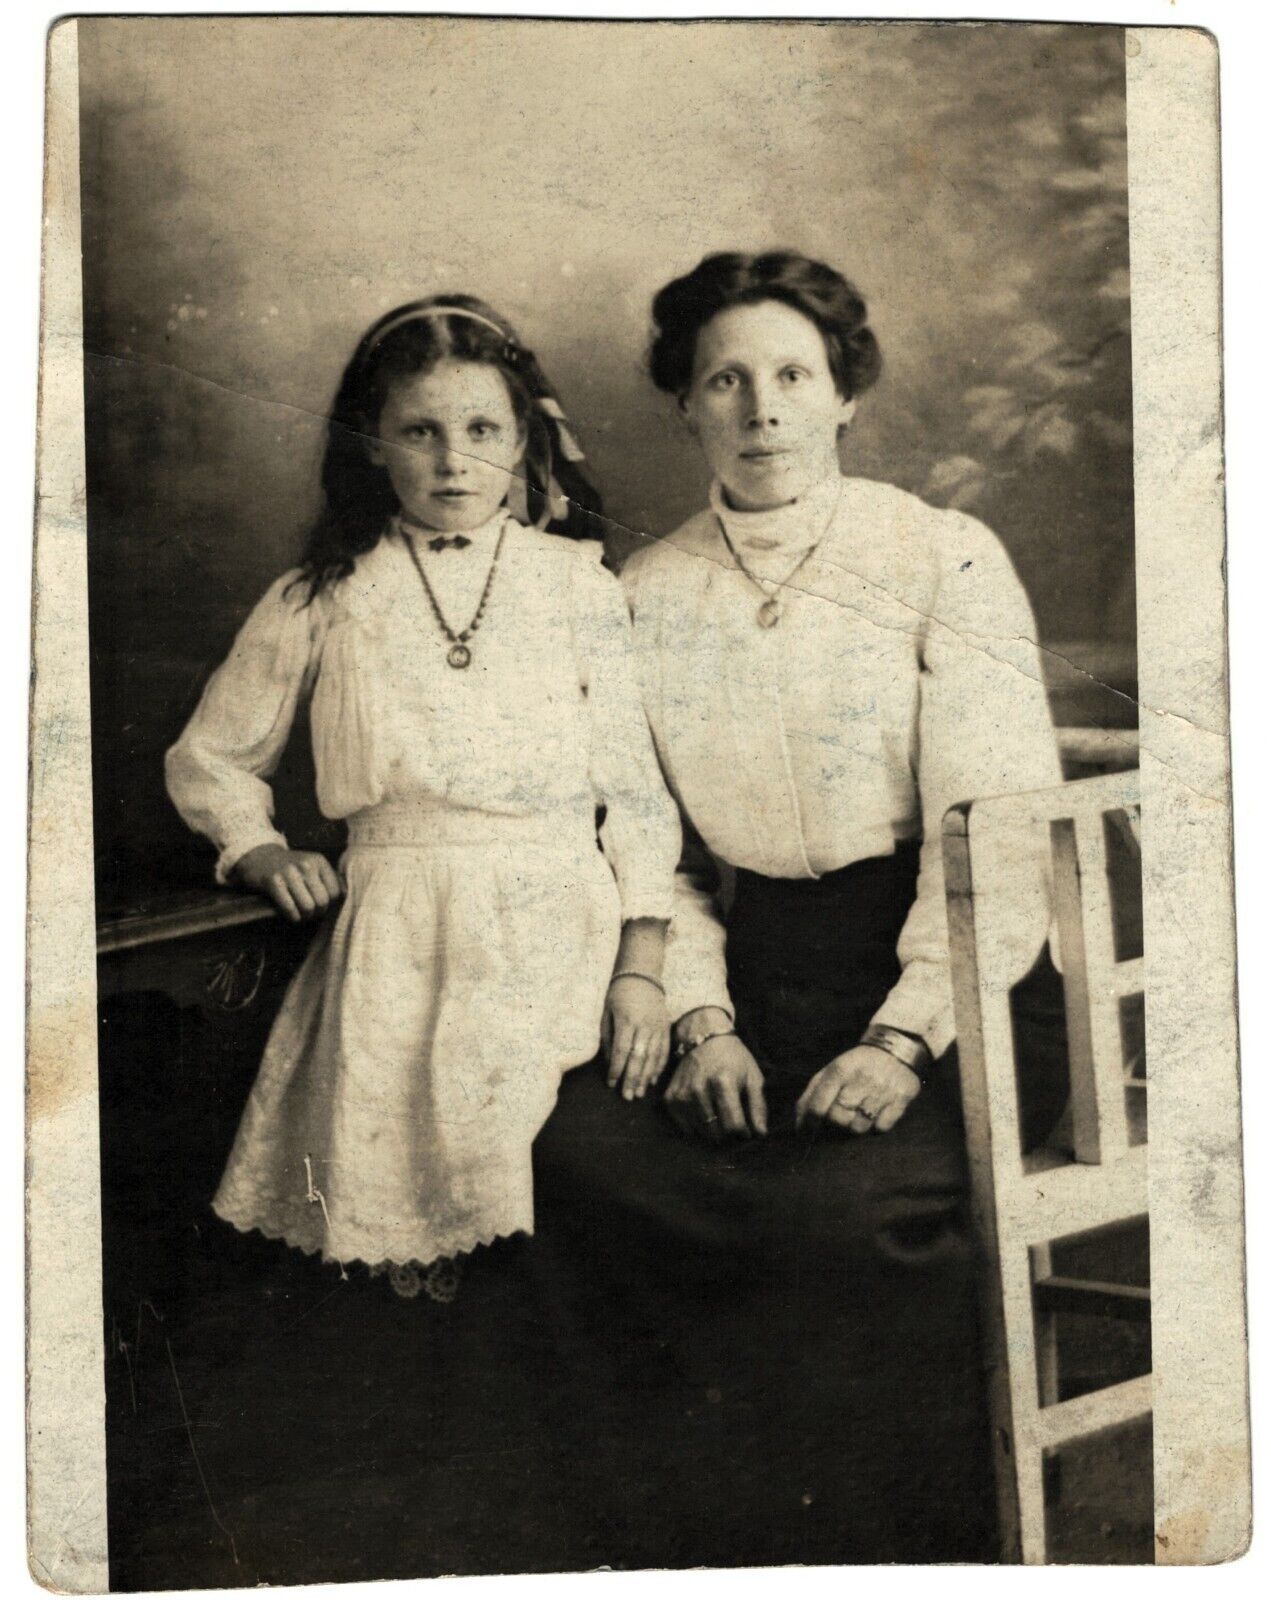 Real Photo Postcard RPPC - Daughter and Mother, England Early 1900s - Cut Down